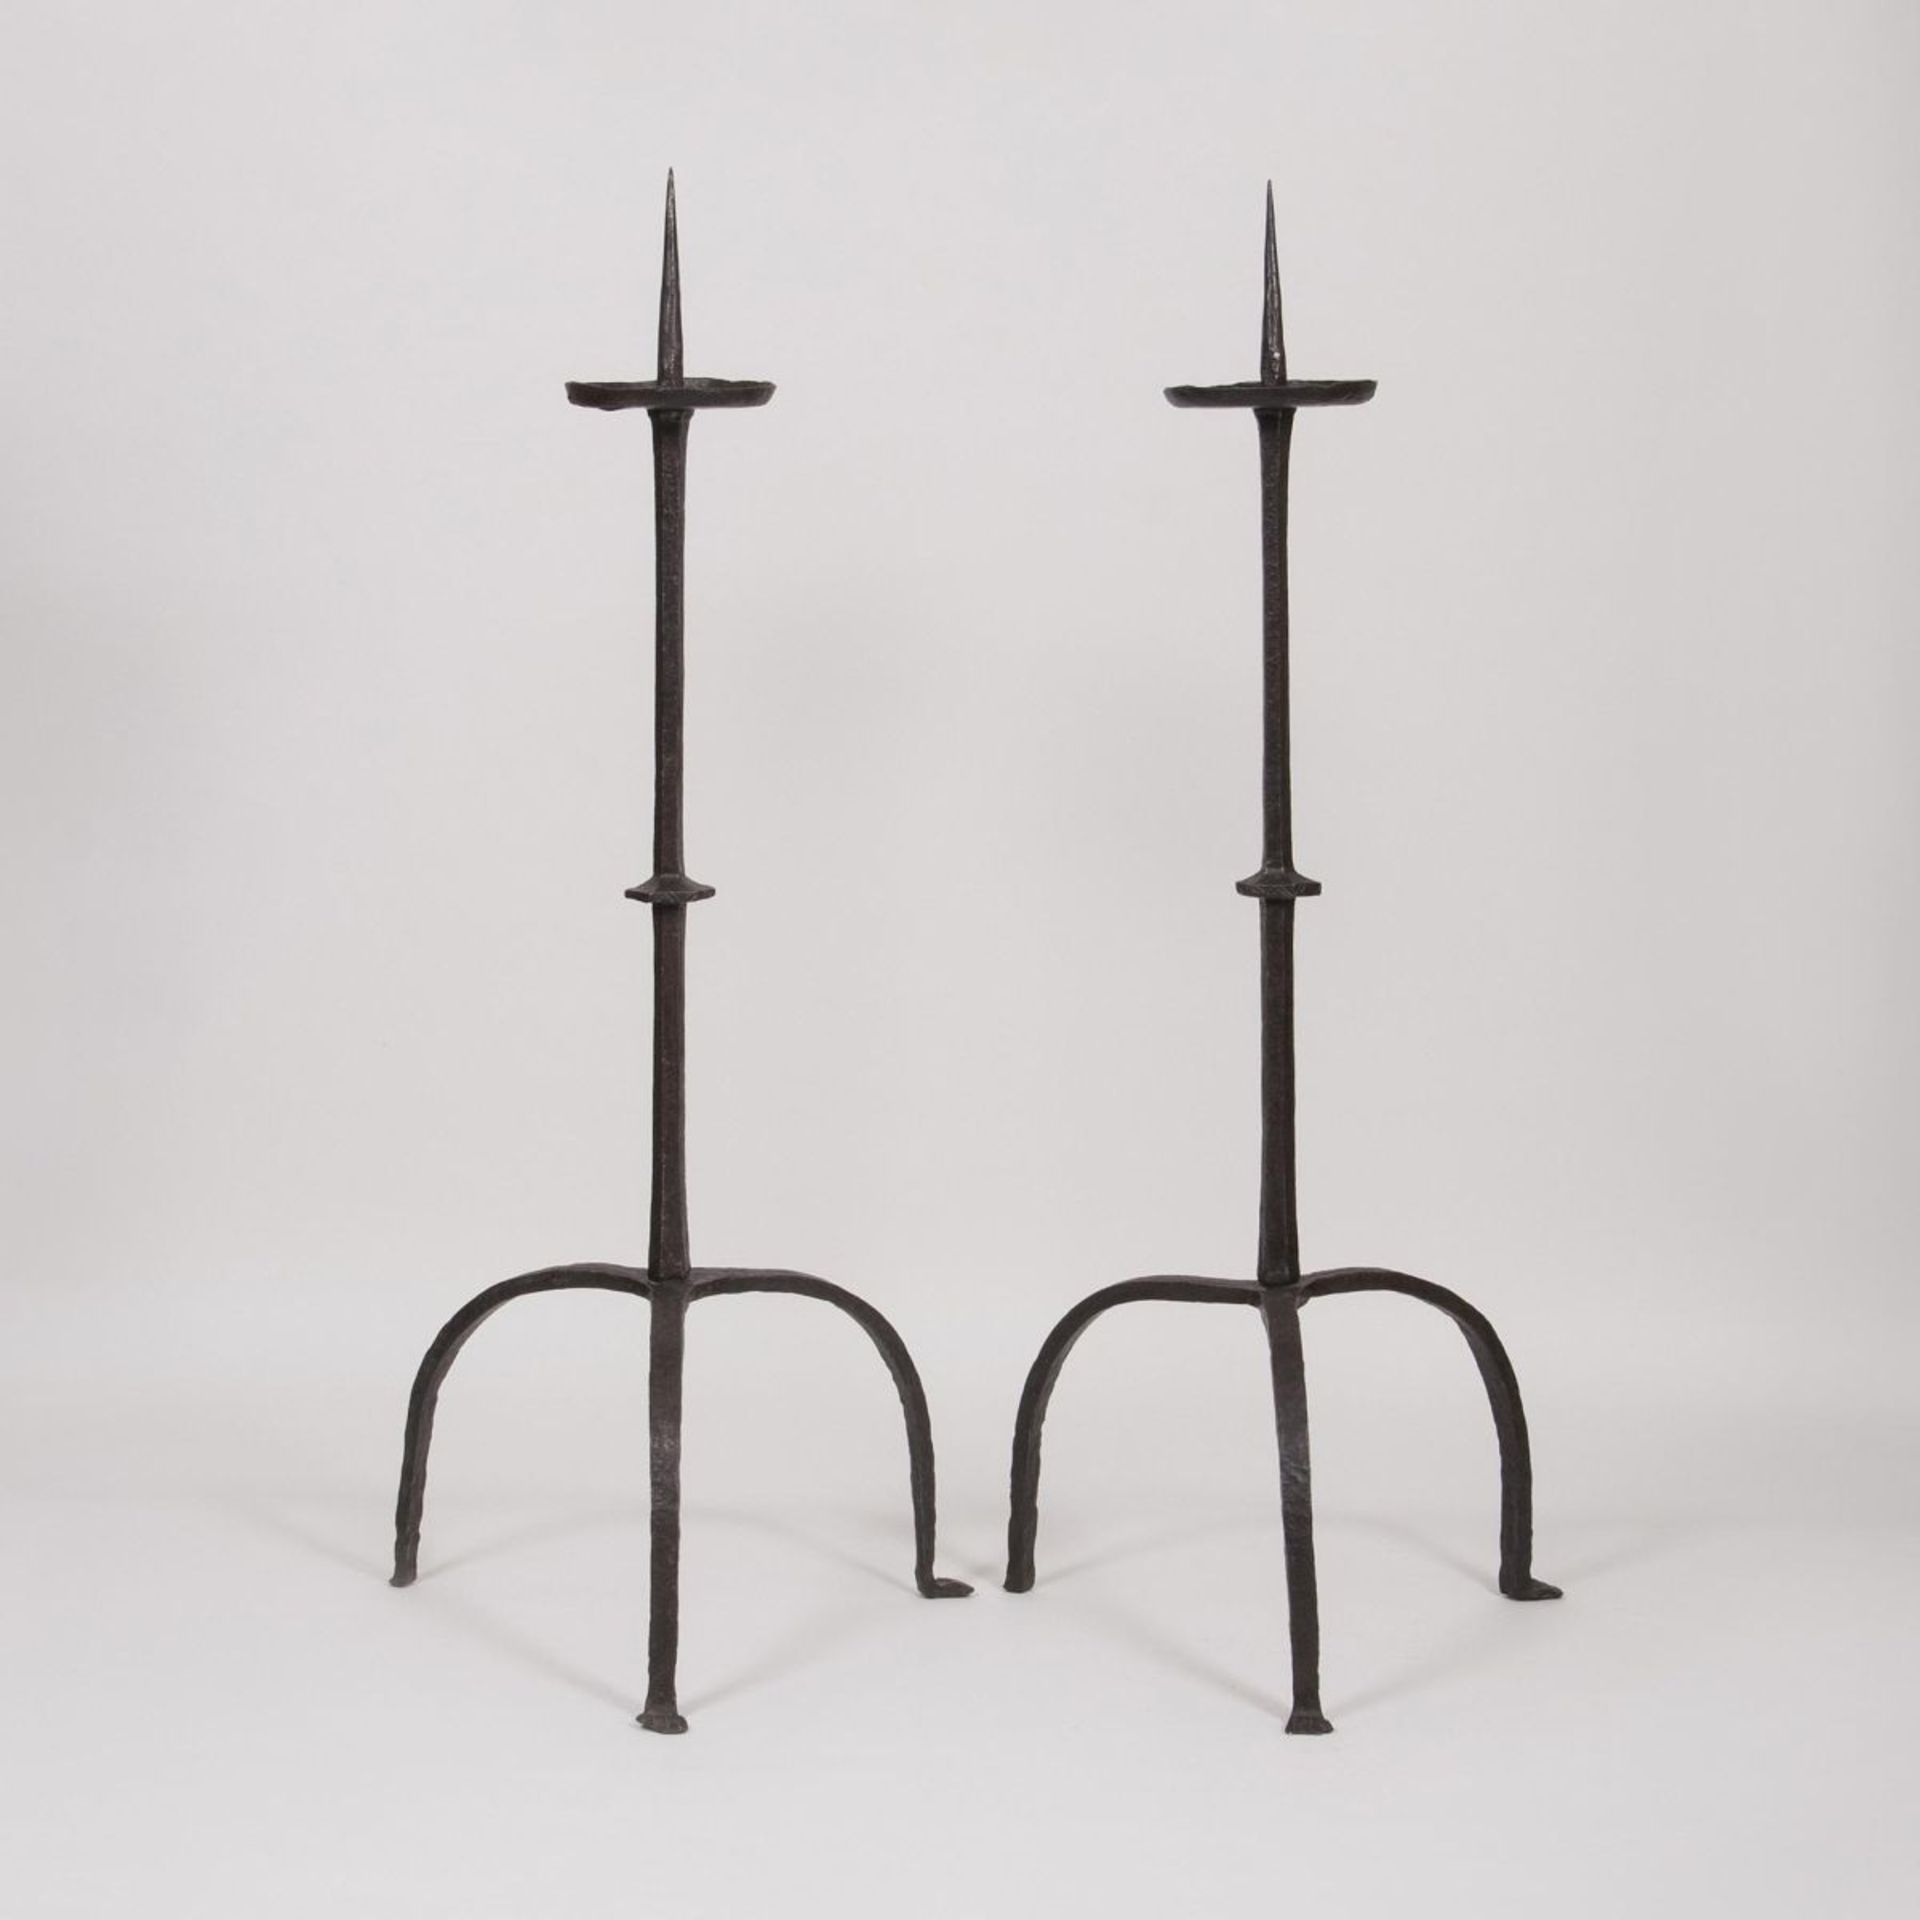 A Pair of large Gothic Wrought Iron CandelabrasSquare wrought iron shaft onto a tripod stand with